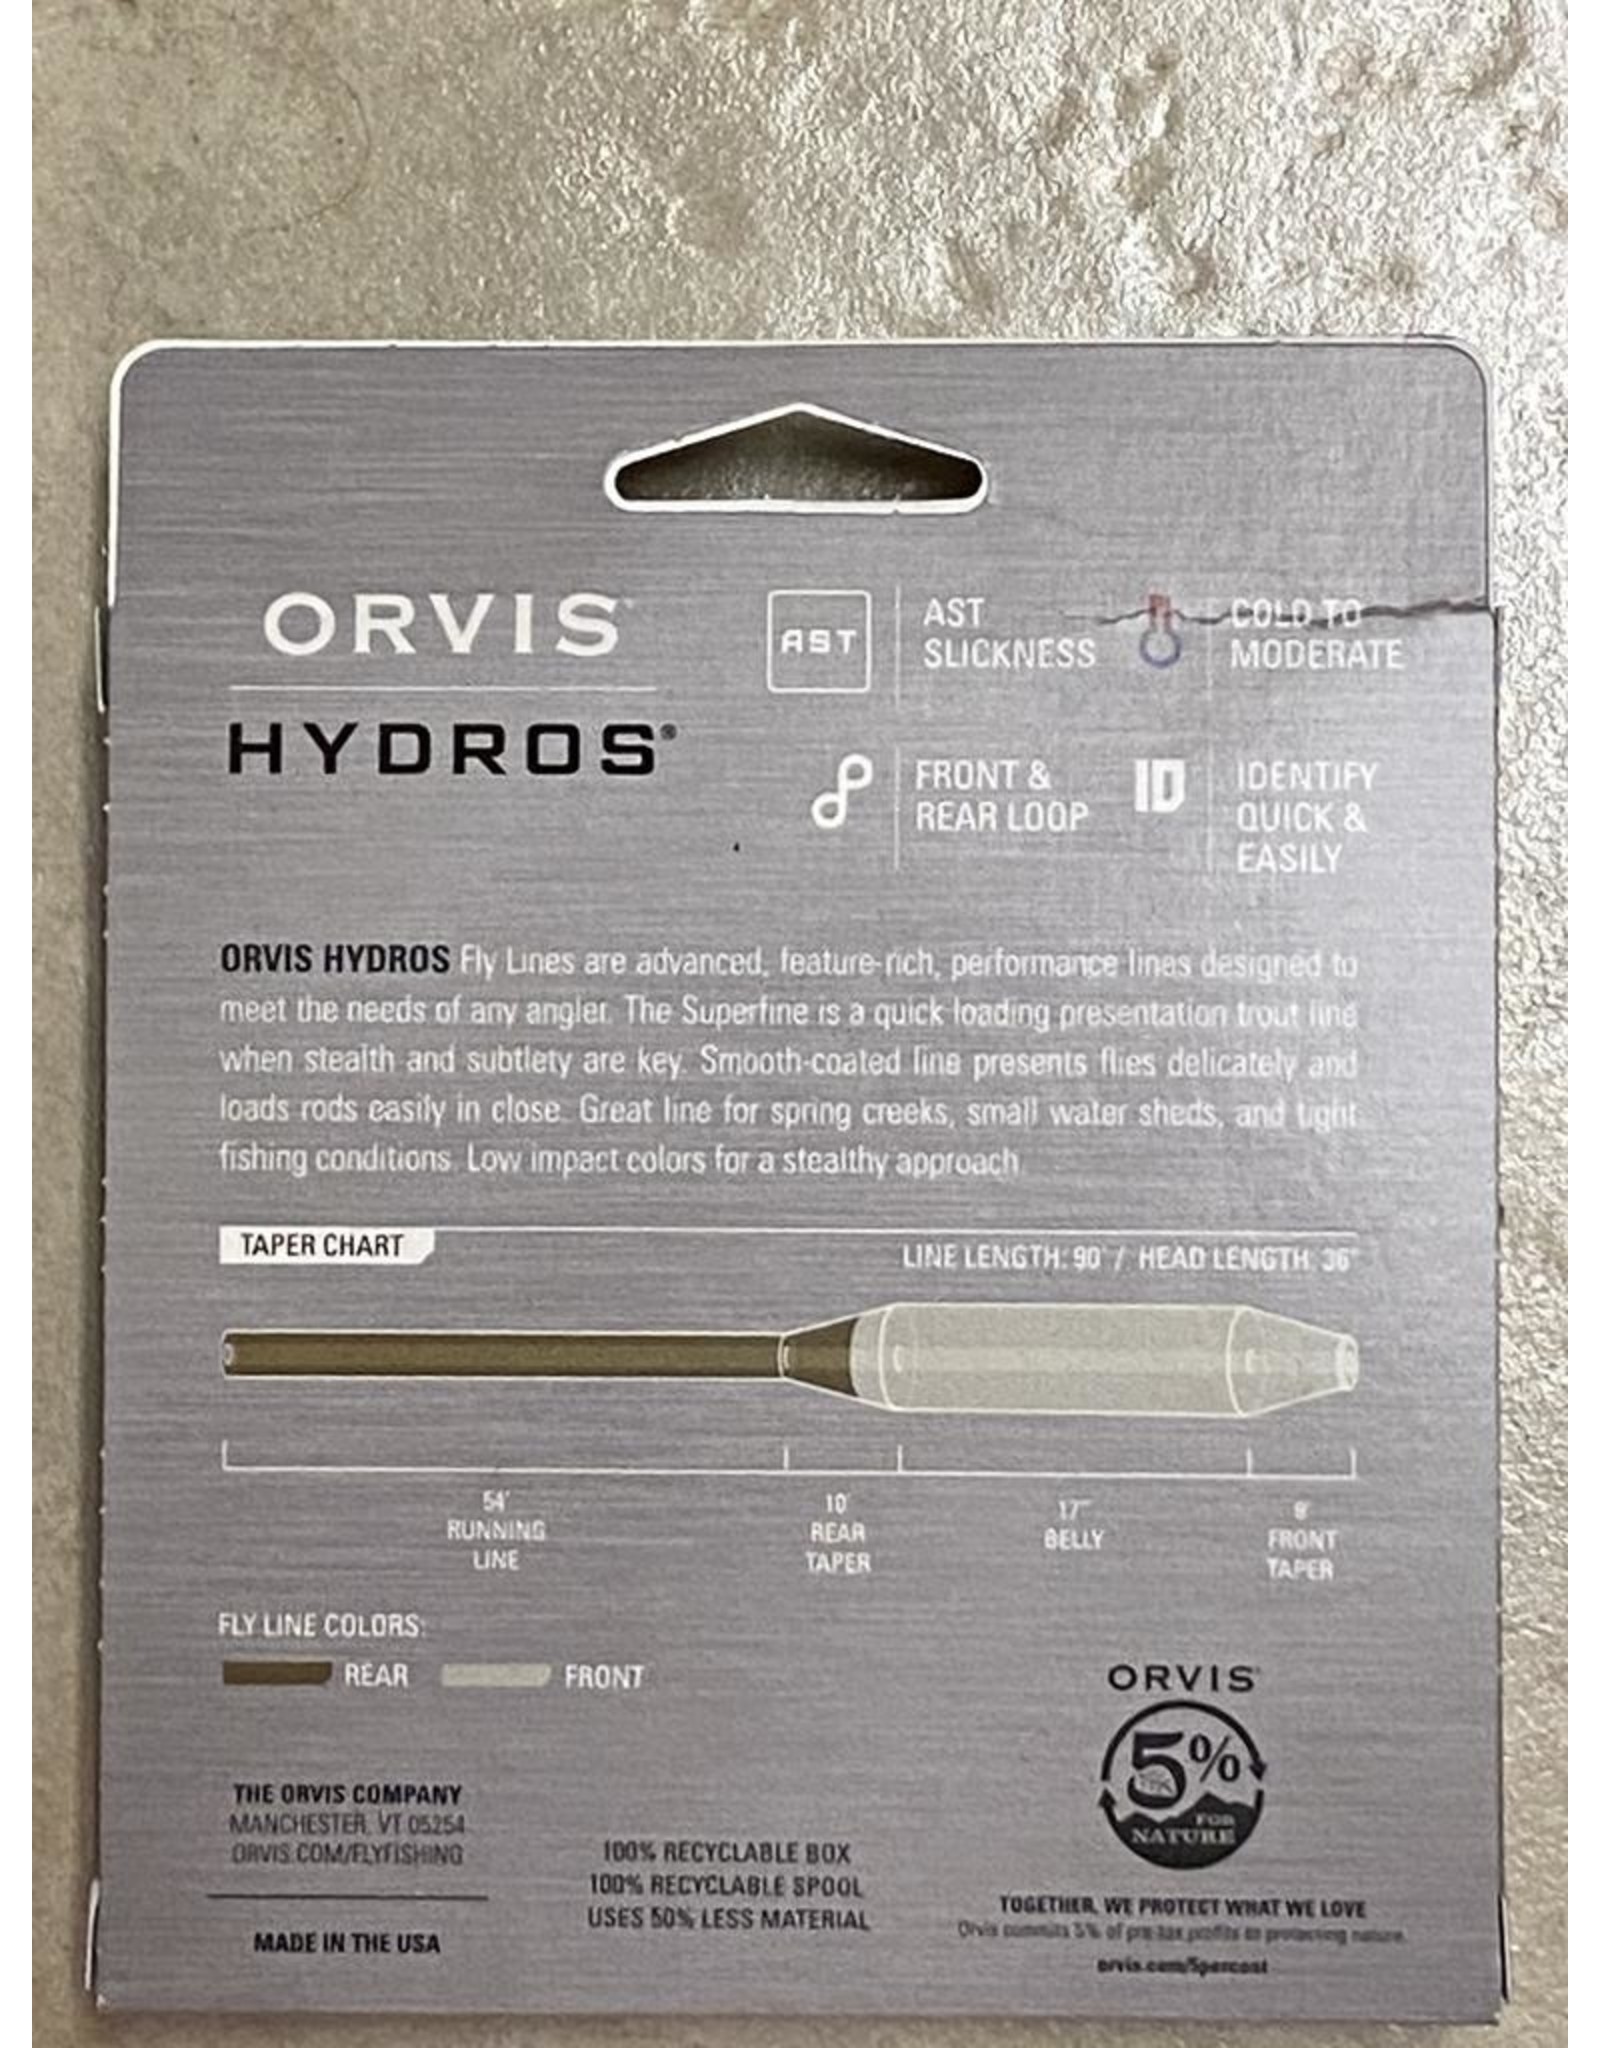 Orvis NEW ORVIS Hydros Superfine Fly Line - Royal Gorge Anglers